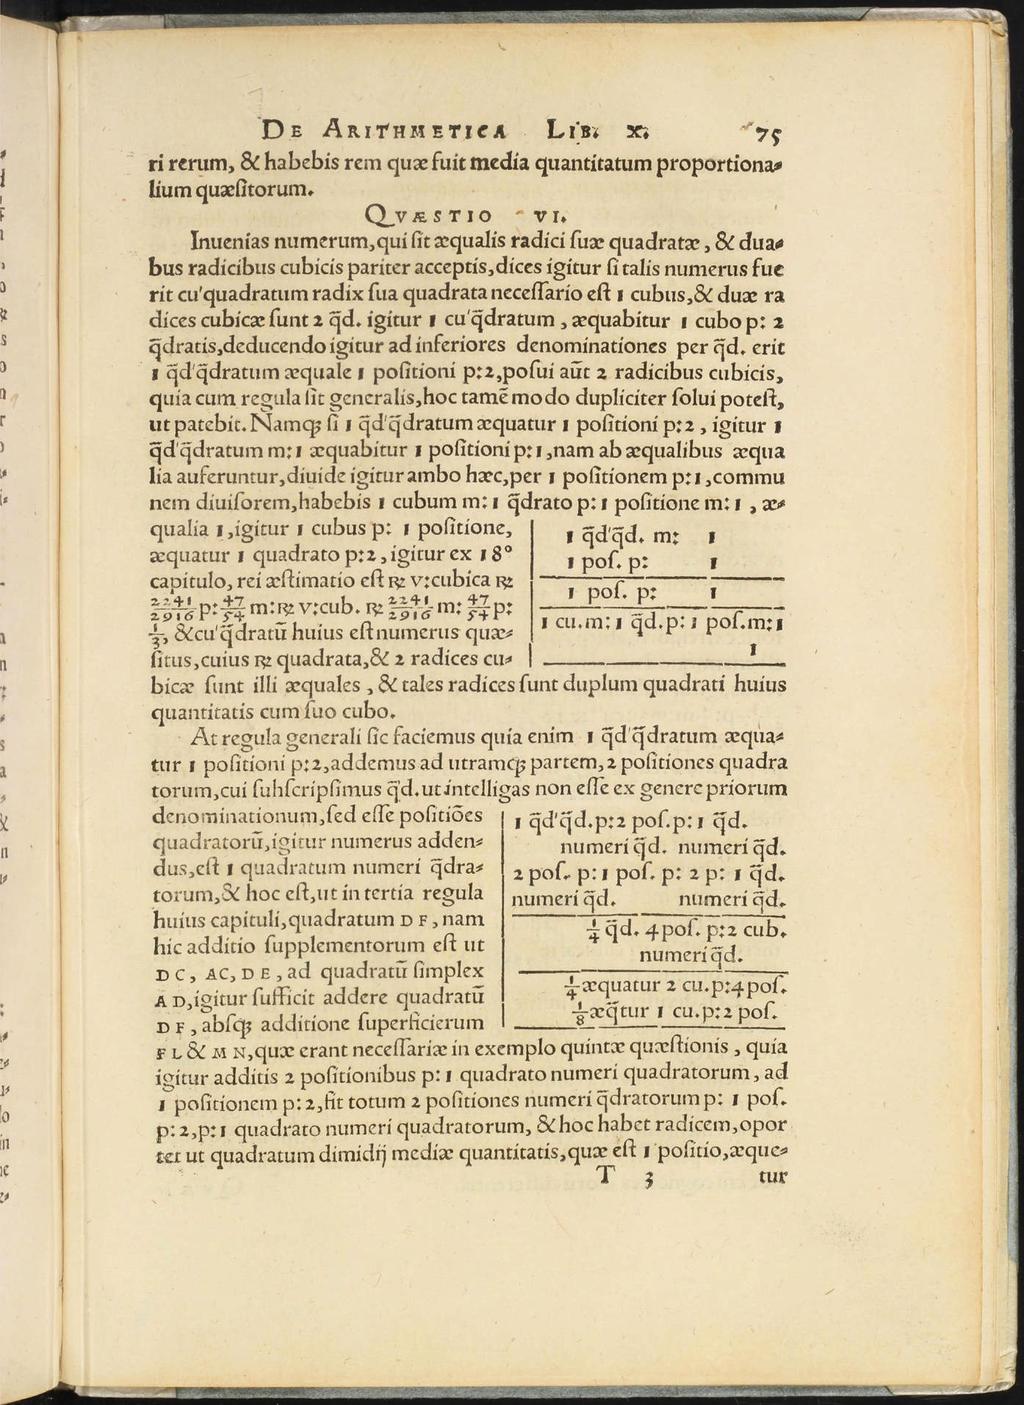 Quartic equations (1) General solution discovered (again on a case-by-case basis) by Lodovico